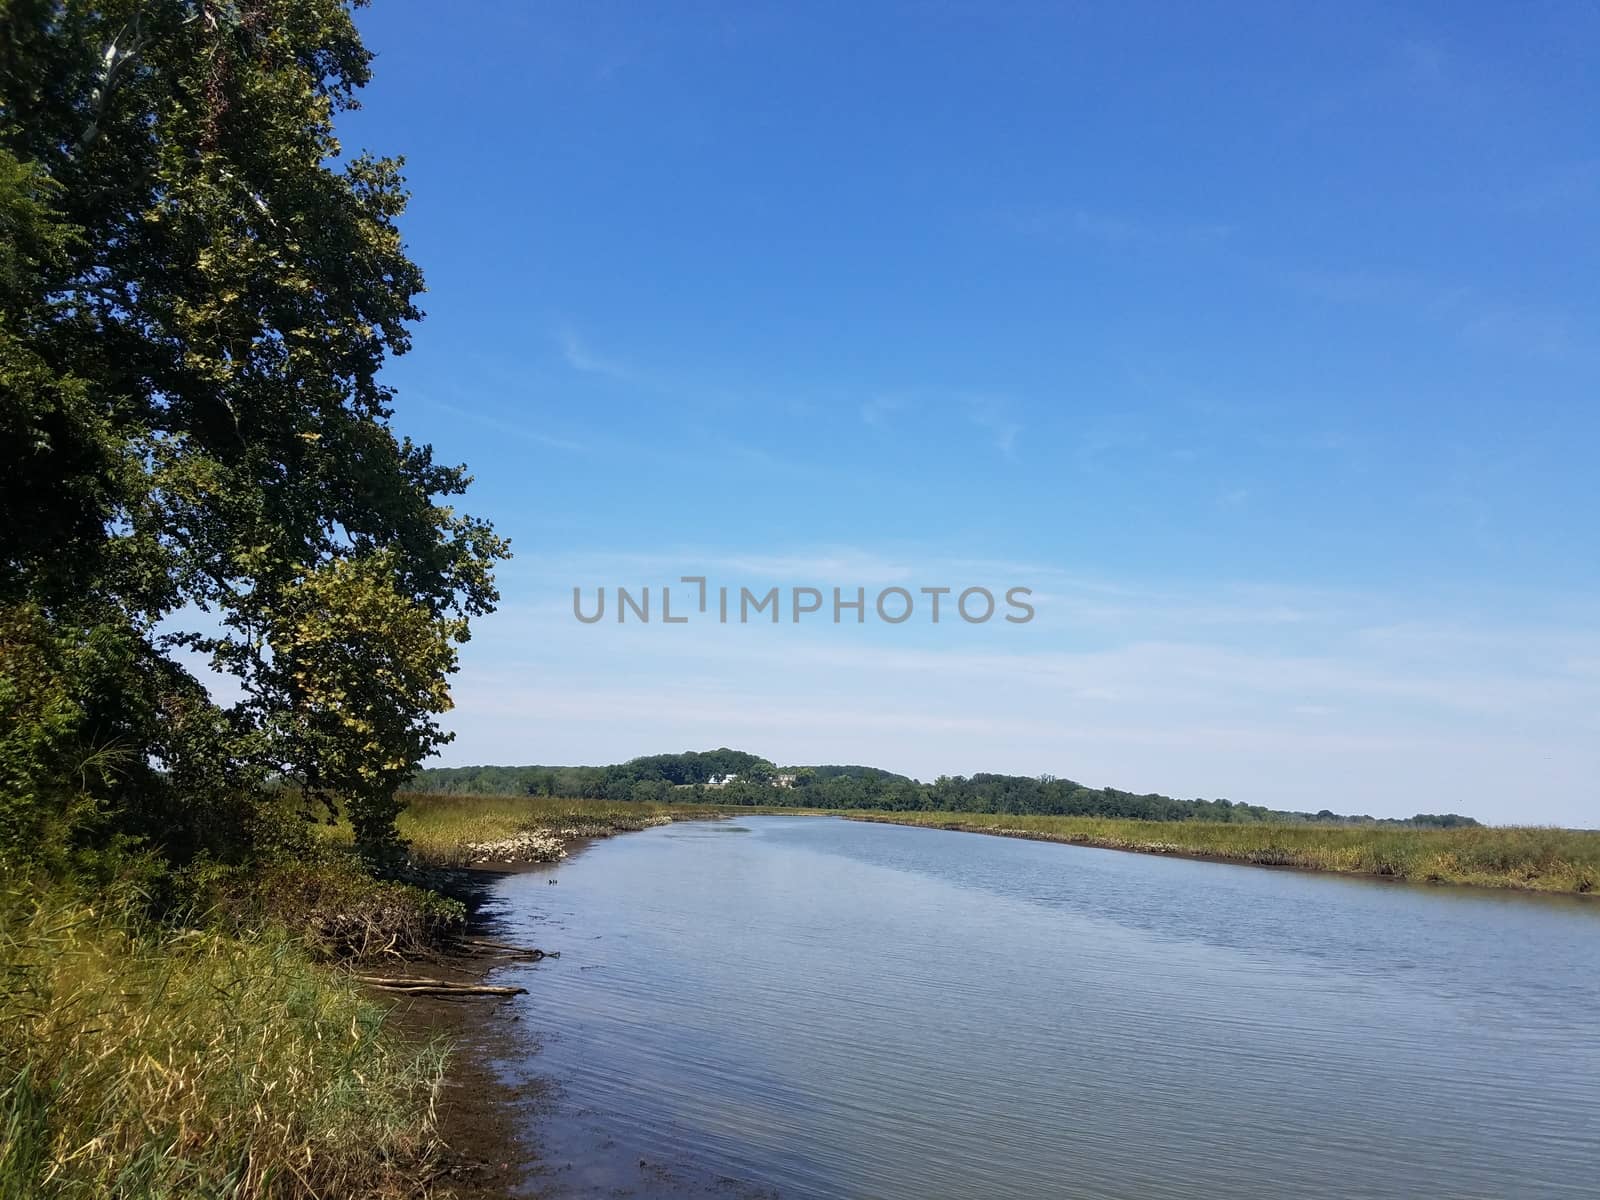 river or lake water and blue sky and grass by stockphotofan1